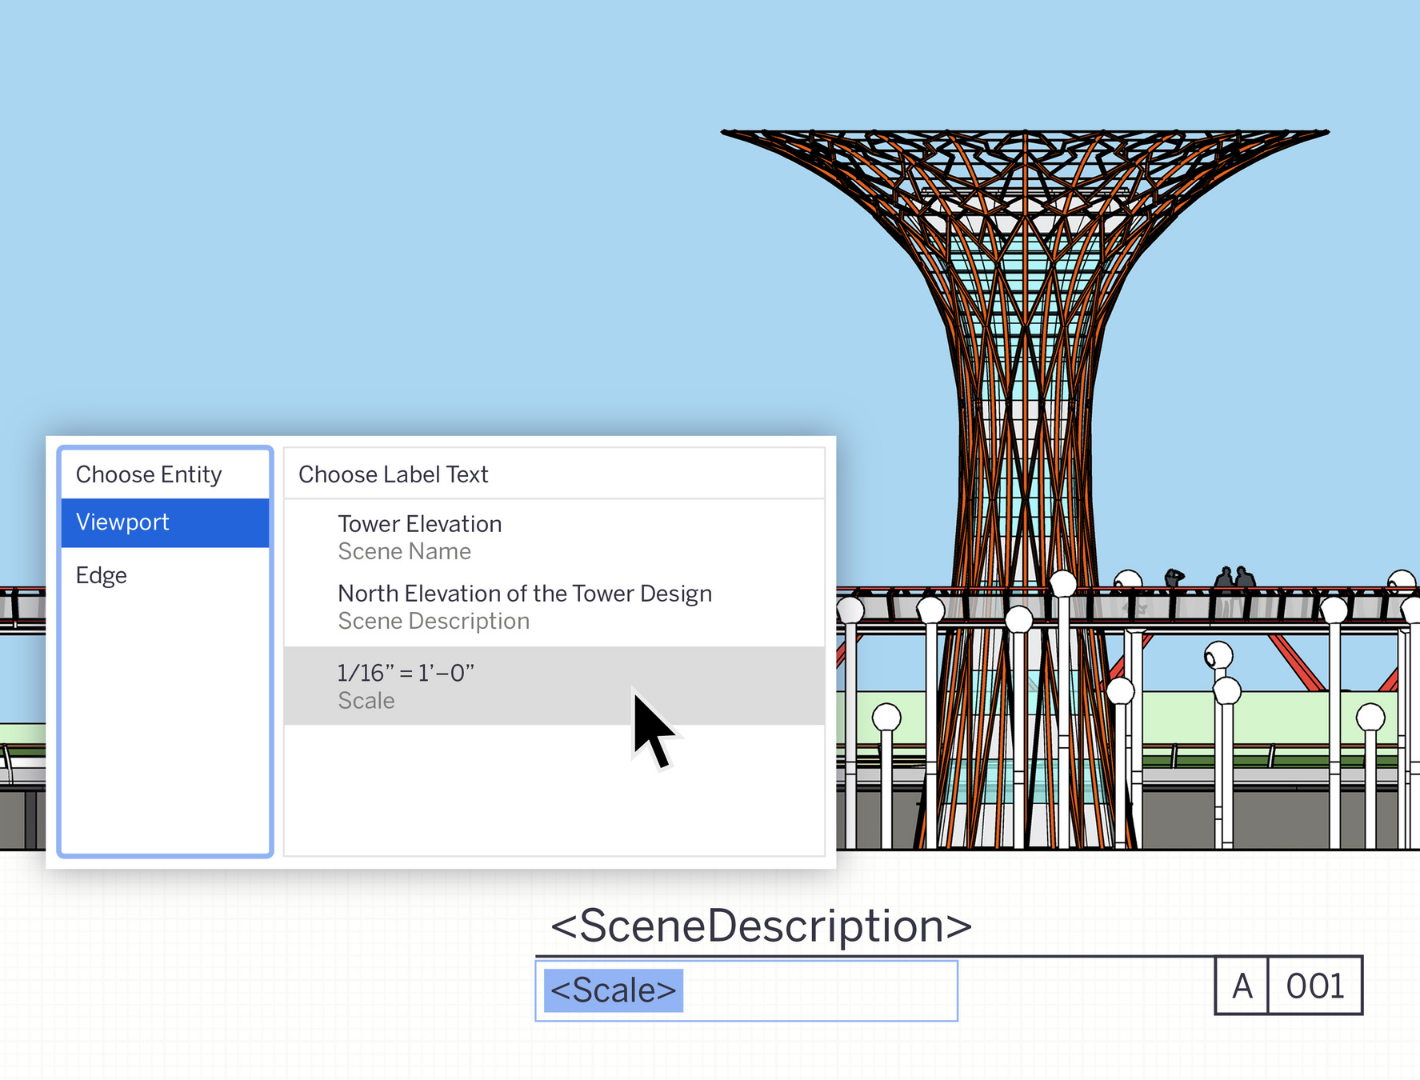 Work smarter, not harder in 2023 with SketchUp Pro